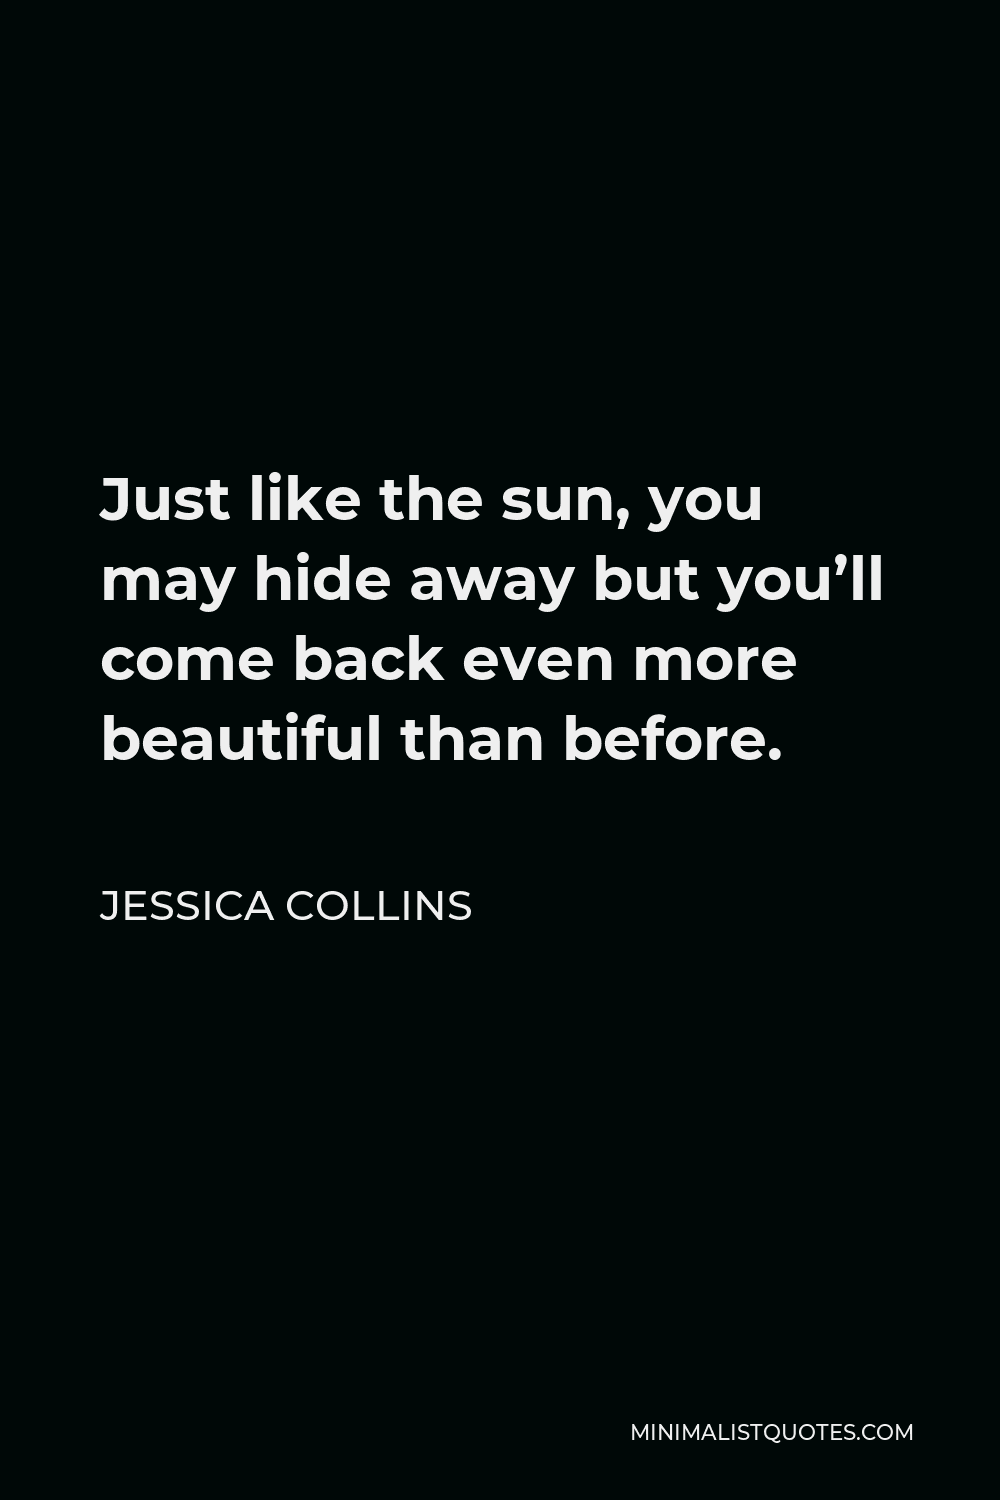 Jessica Collins Quote - Just like the sun, you may hide away but you’ll come back even more beautiful than before.